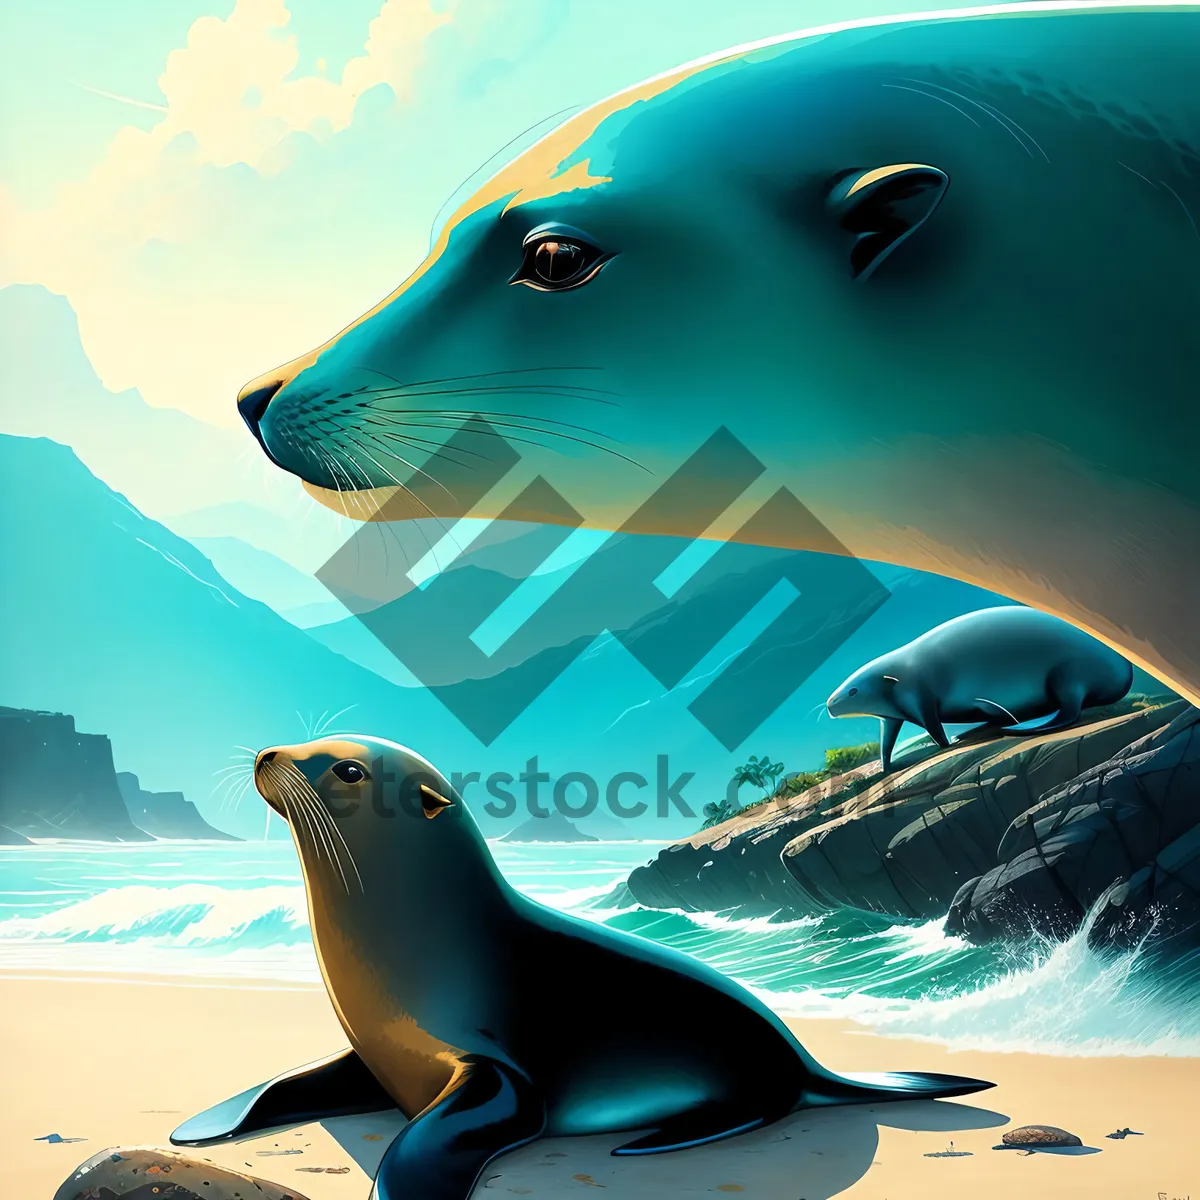 Picture of Underwater Marine Life: Seal and Dolphin Swimming in Tropical Ocean